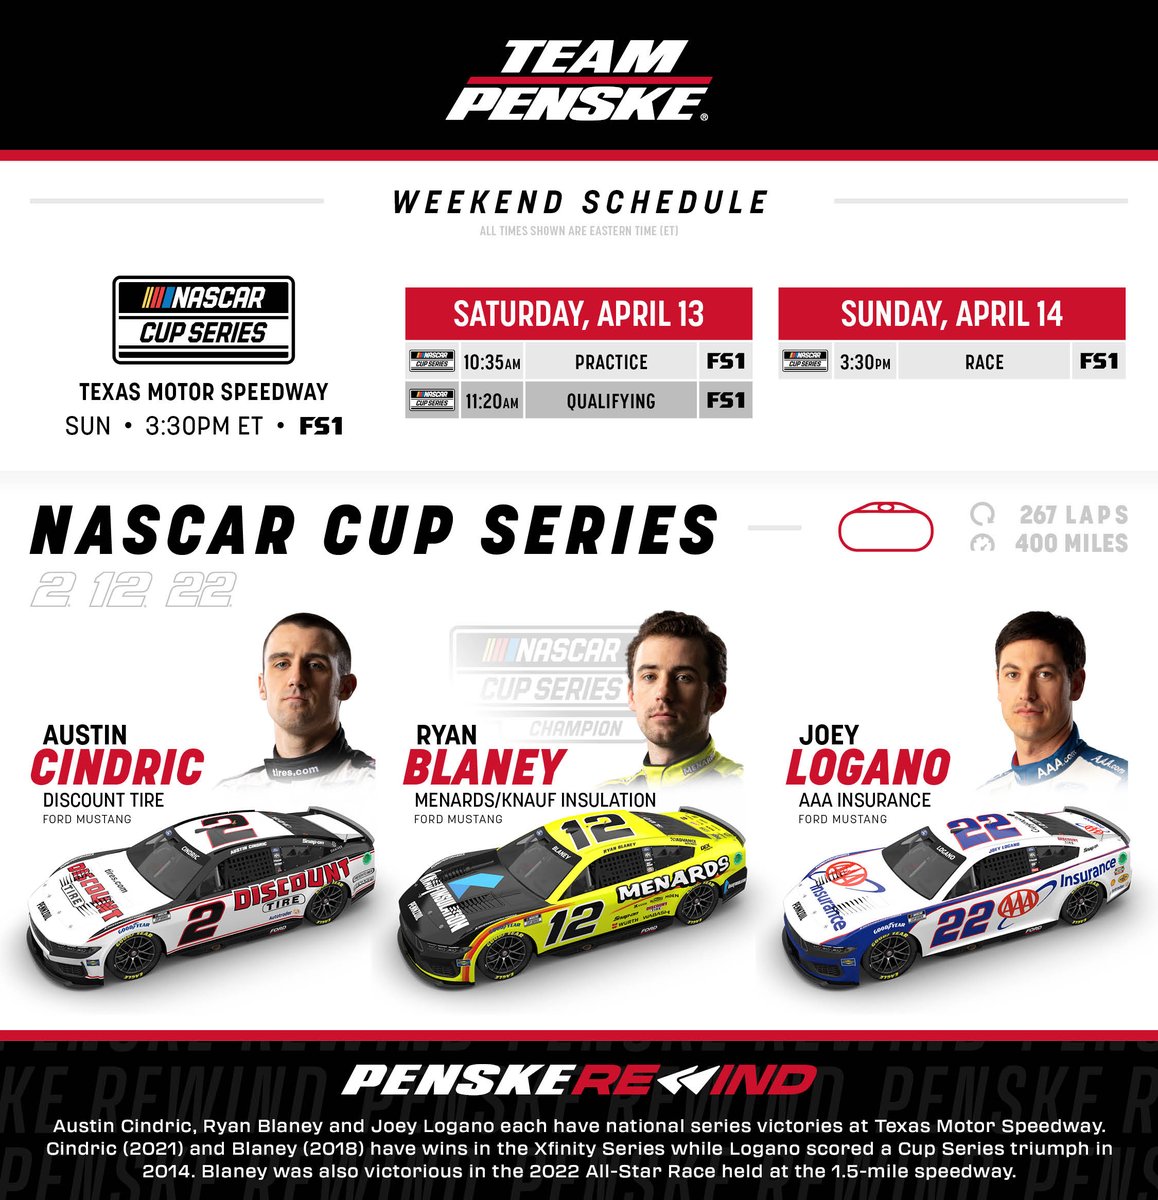 #TeamPenske is ready to two-step their way to a Cup Series win at @TXMotorSpeedway this weekend! Drop a 🤠 in the comments below to wish them good luck 👇 #OdysseyBattery | #NASCAR | @Team_Penske